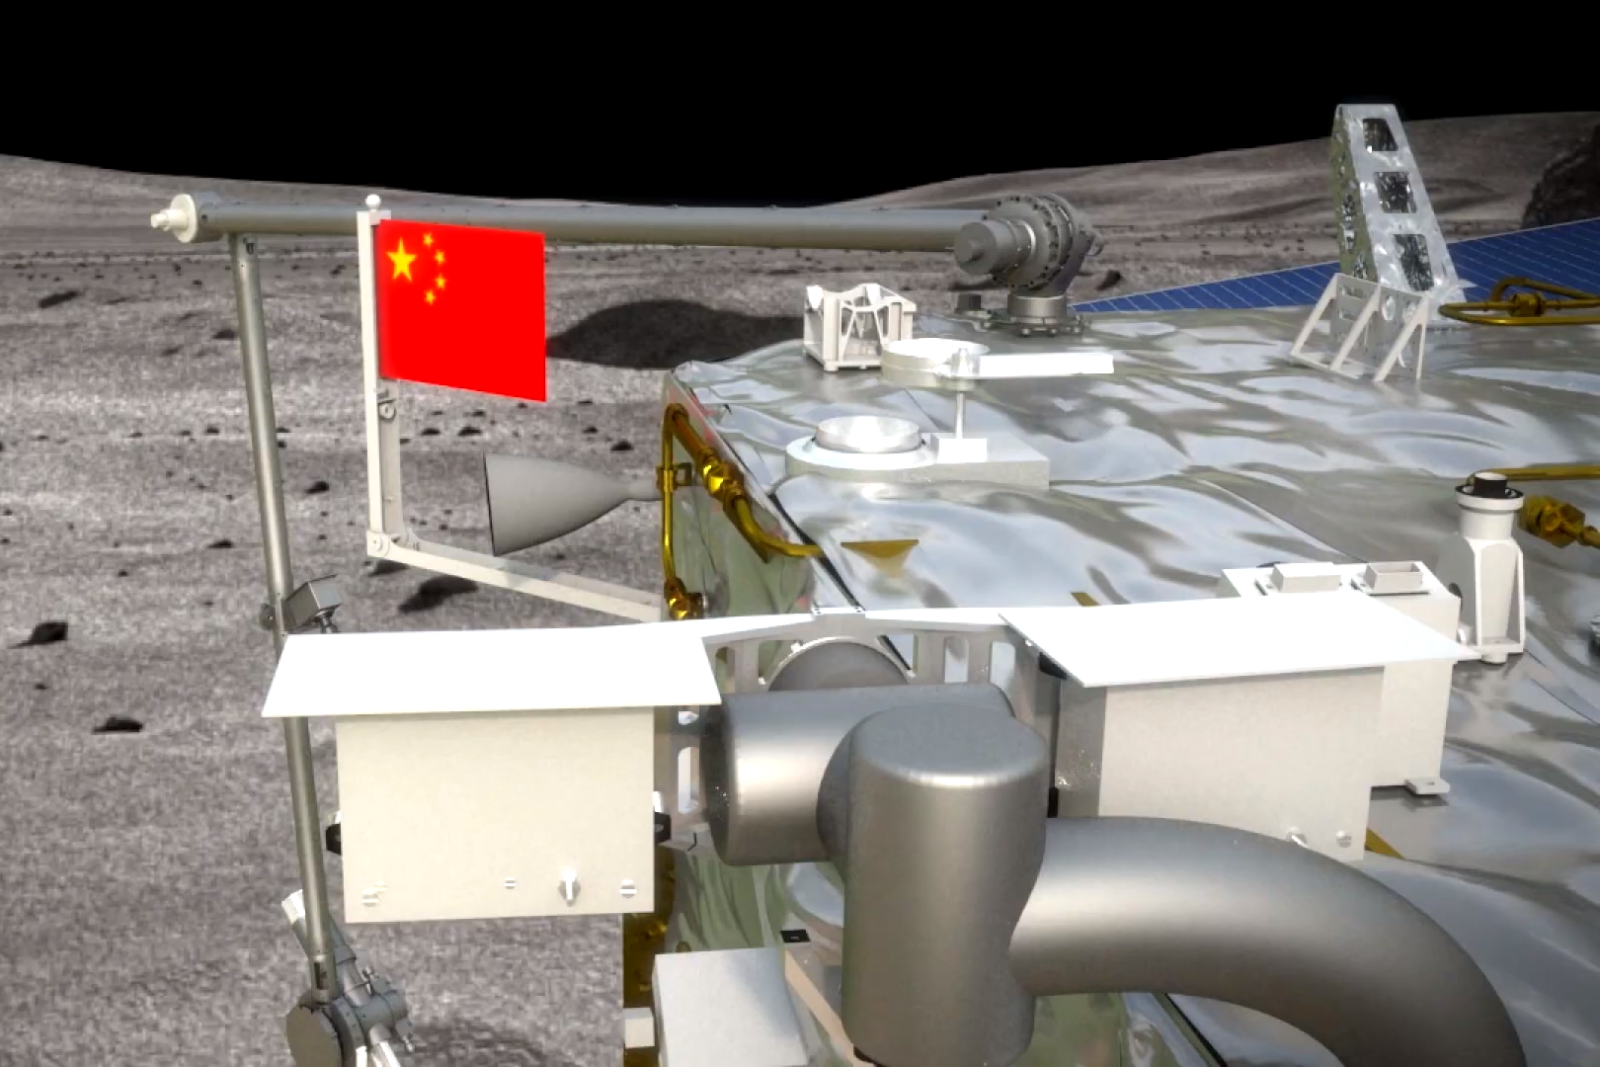 China's Chang'e-5 discovered evidence of water on the moon